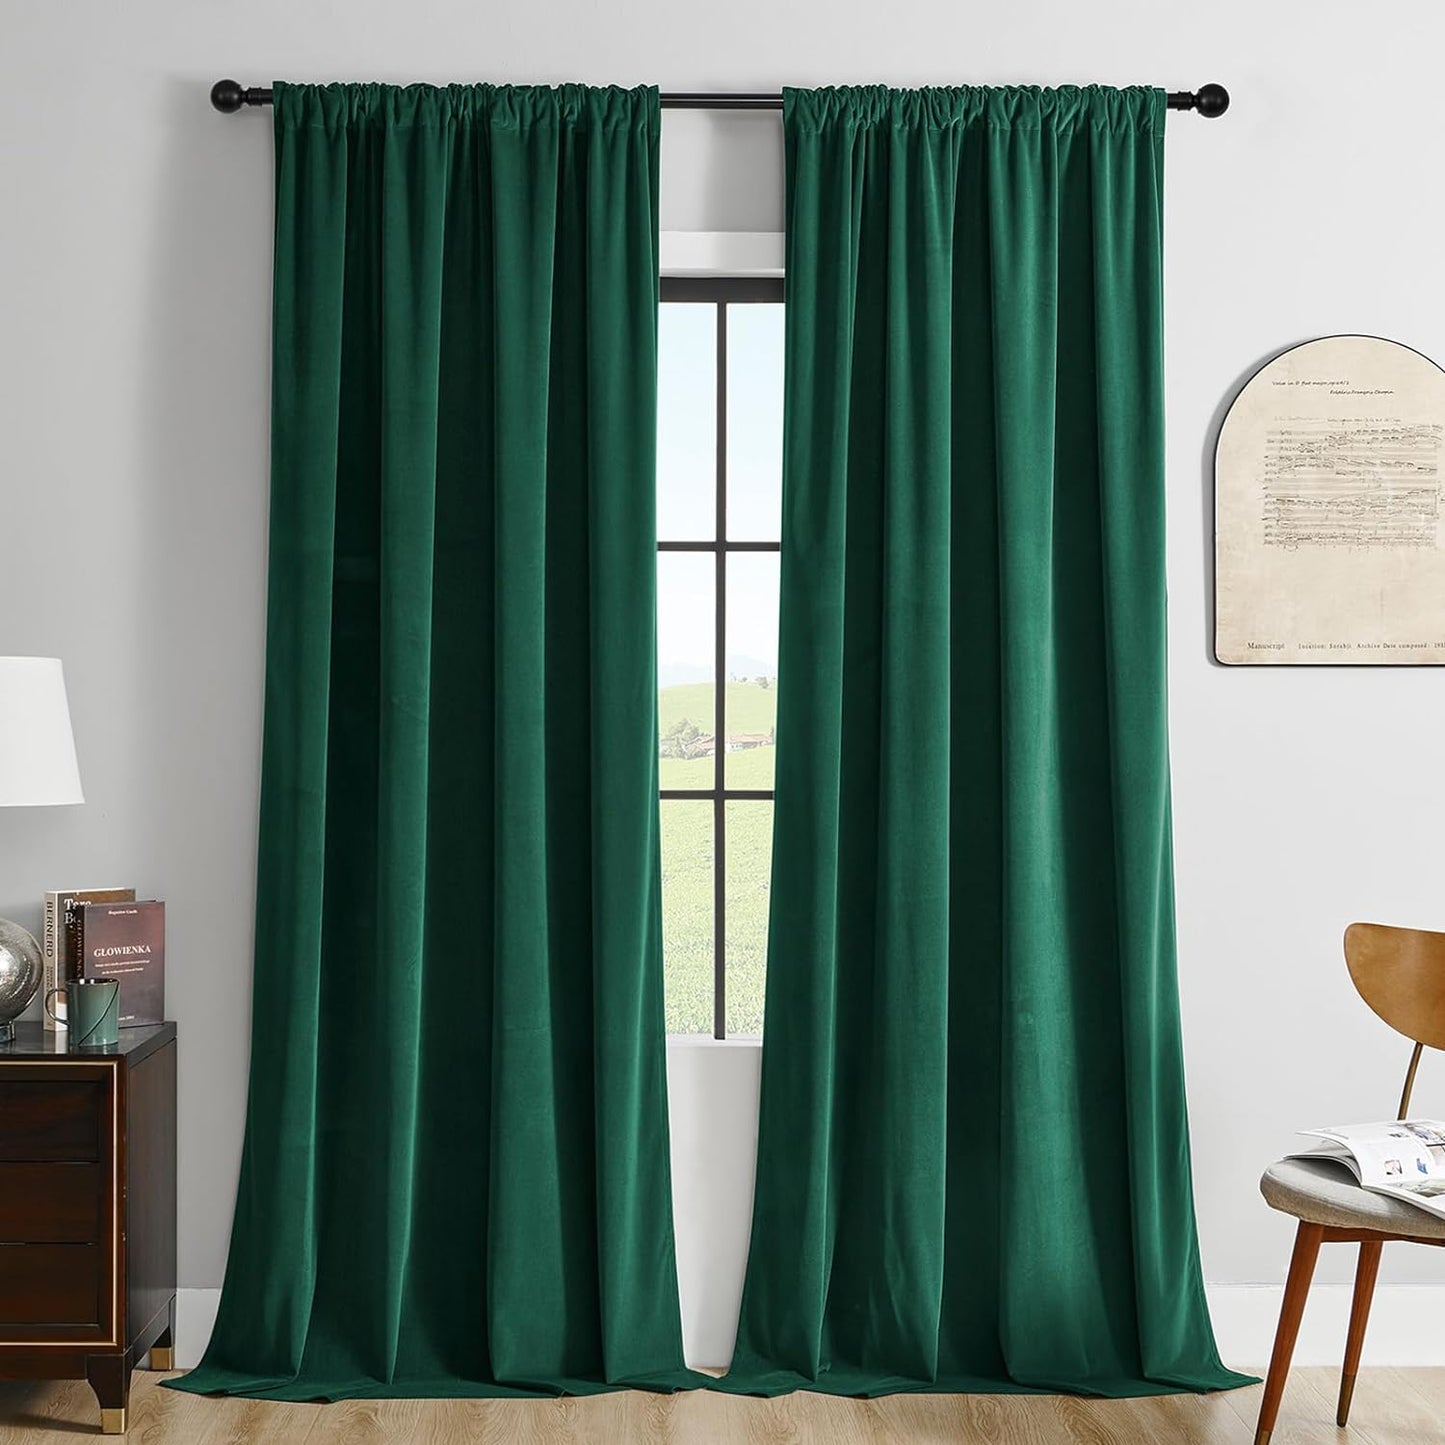 Joydeco Black Velvet Curtains 90 Inch Length 2 Panels, Luxury Blackout Rod Pocket Thermal Insulated Window Curtains, Super Soft Room Darkening Drapes for Living Dining Room Bedroom,W52 X L90 Inches  Joydeco Rod Pocket | Green 52W X 72L Inch X 2 Panels 